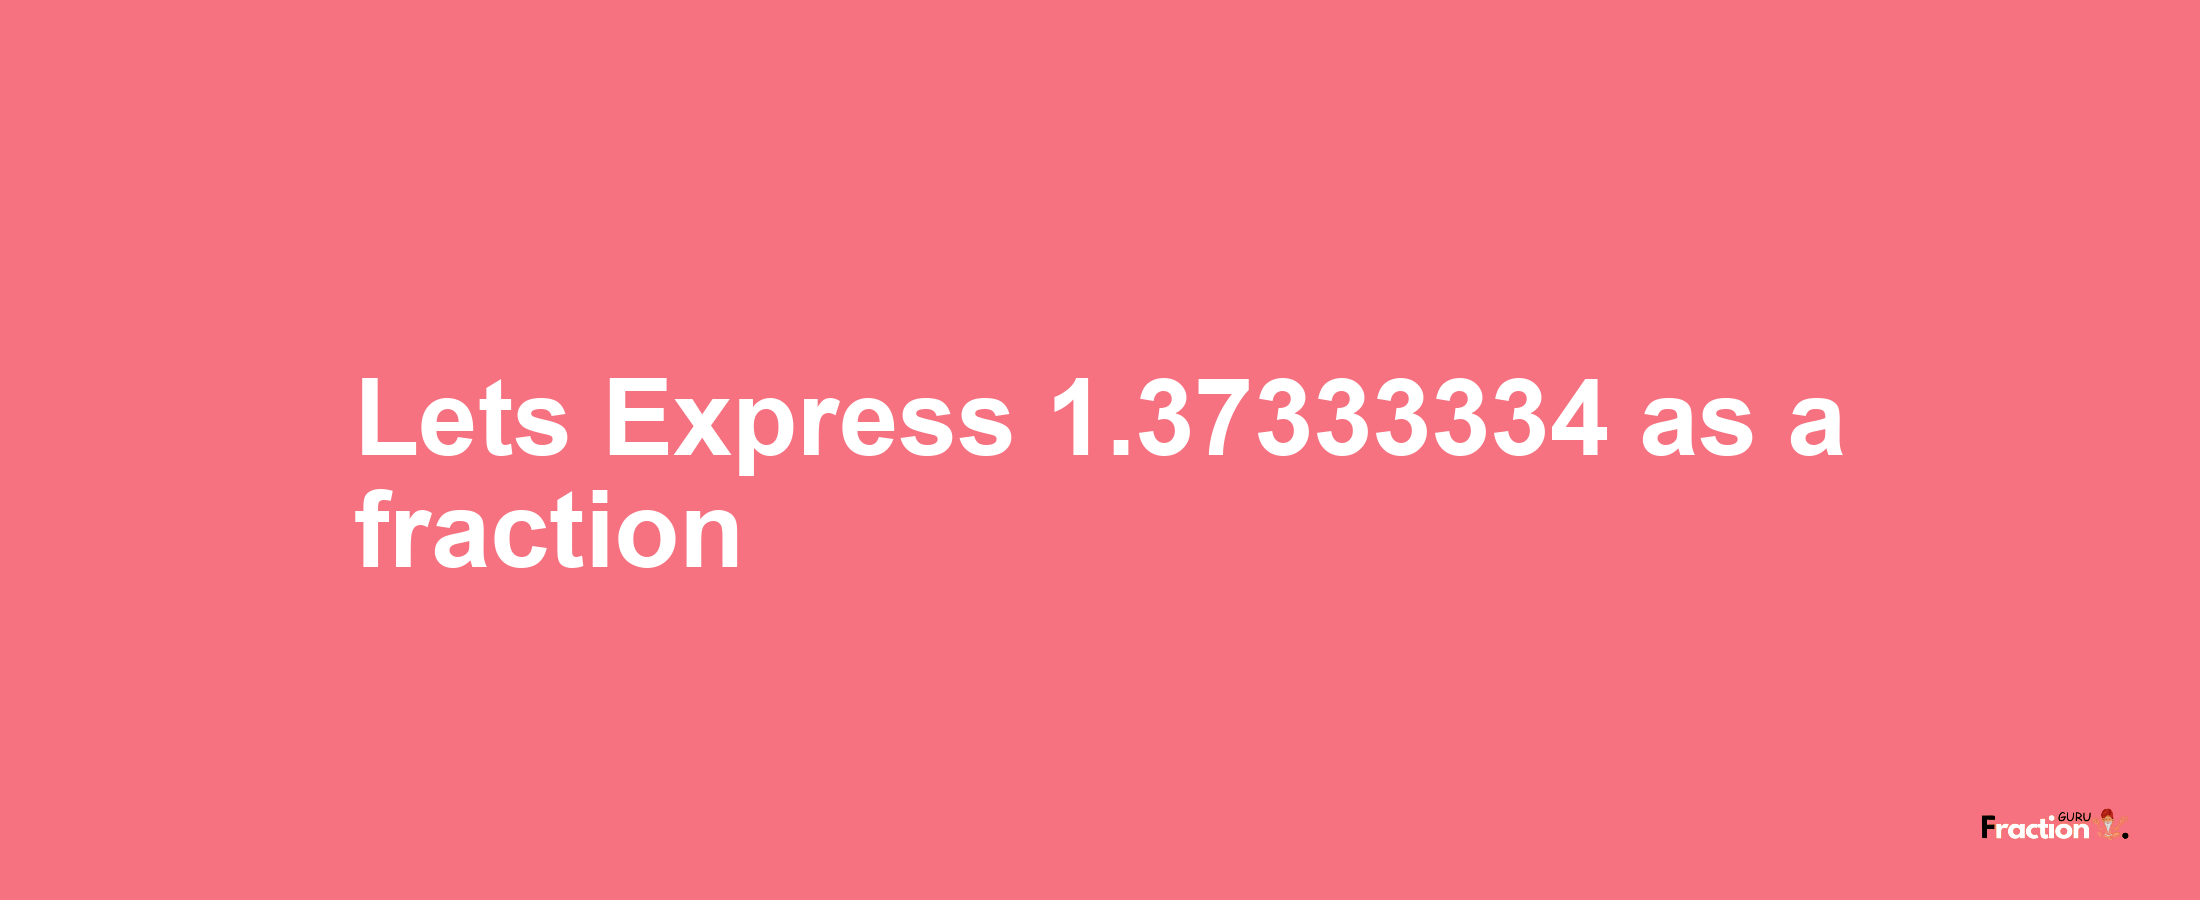 Lets Express 1.37333334 as afraction